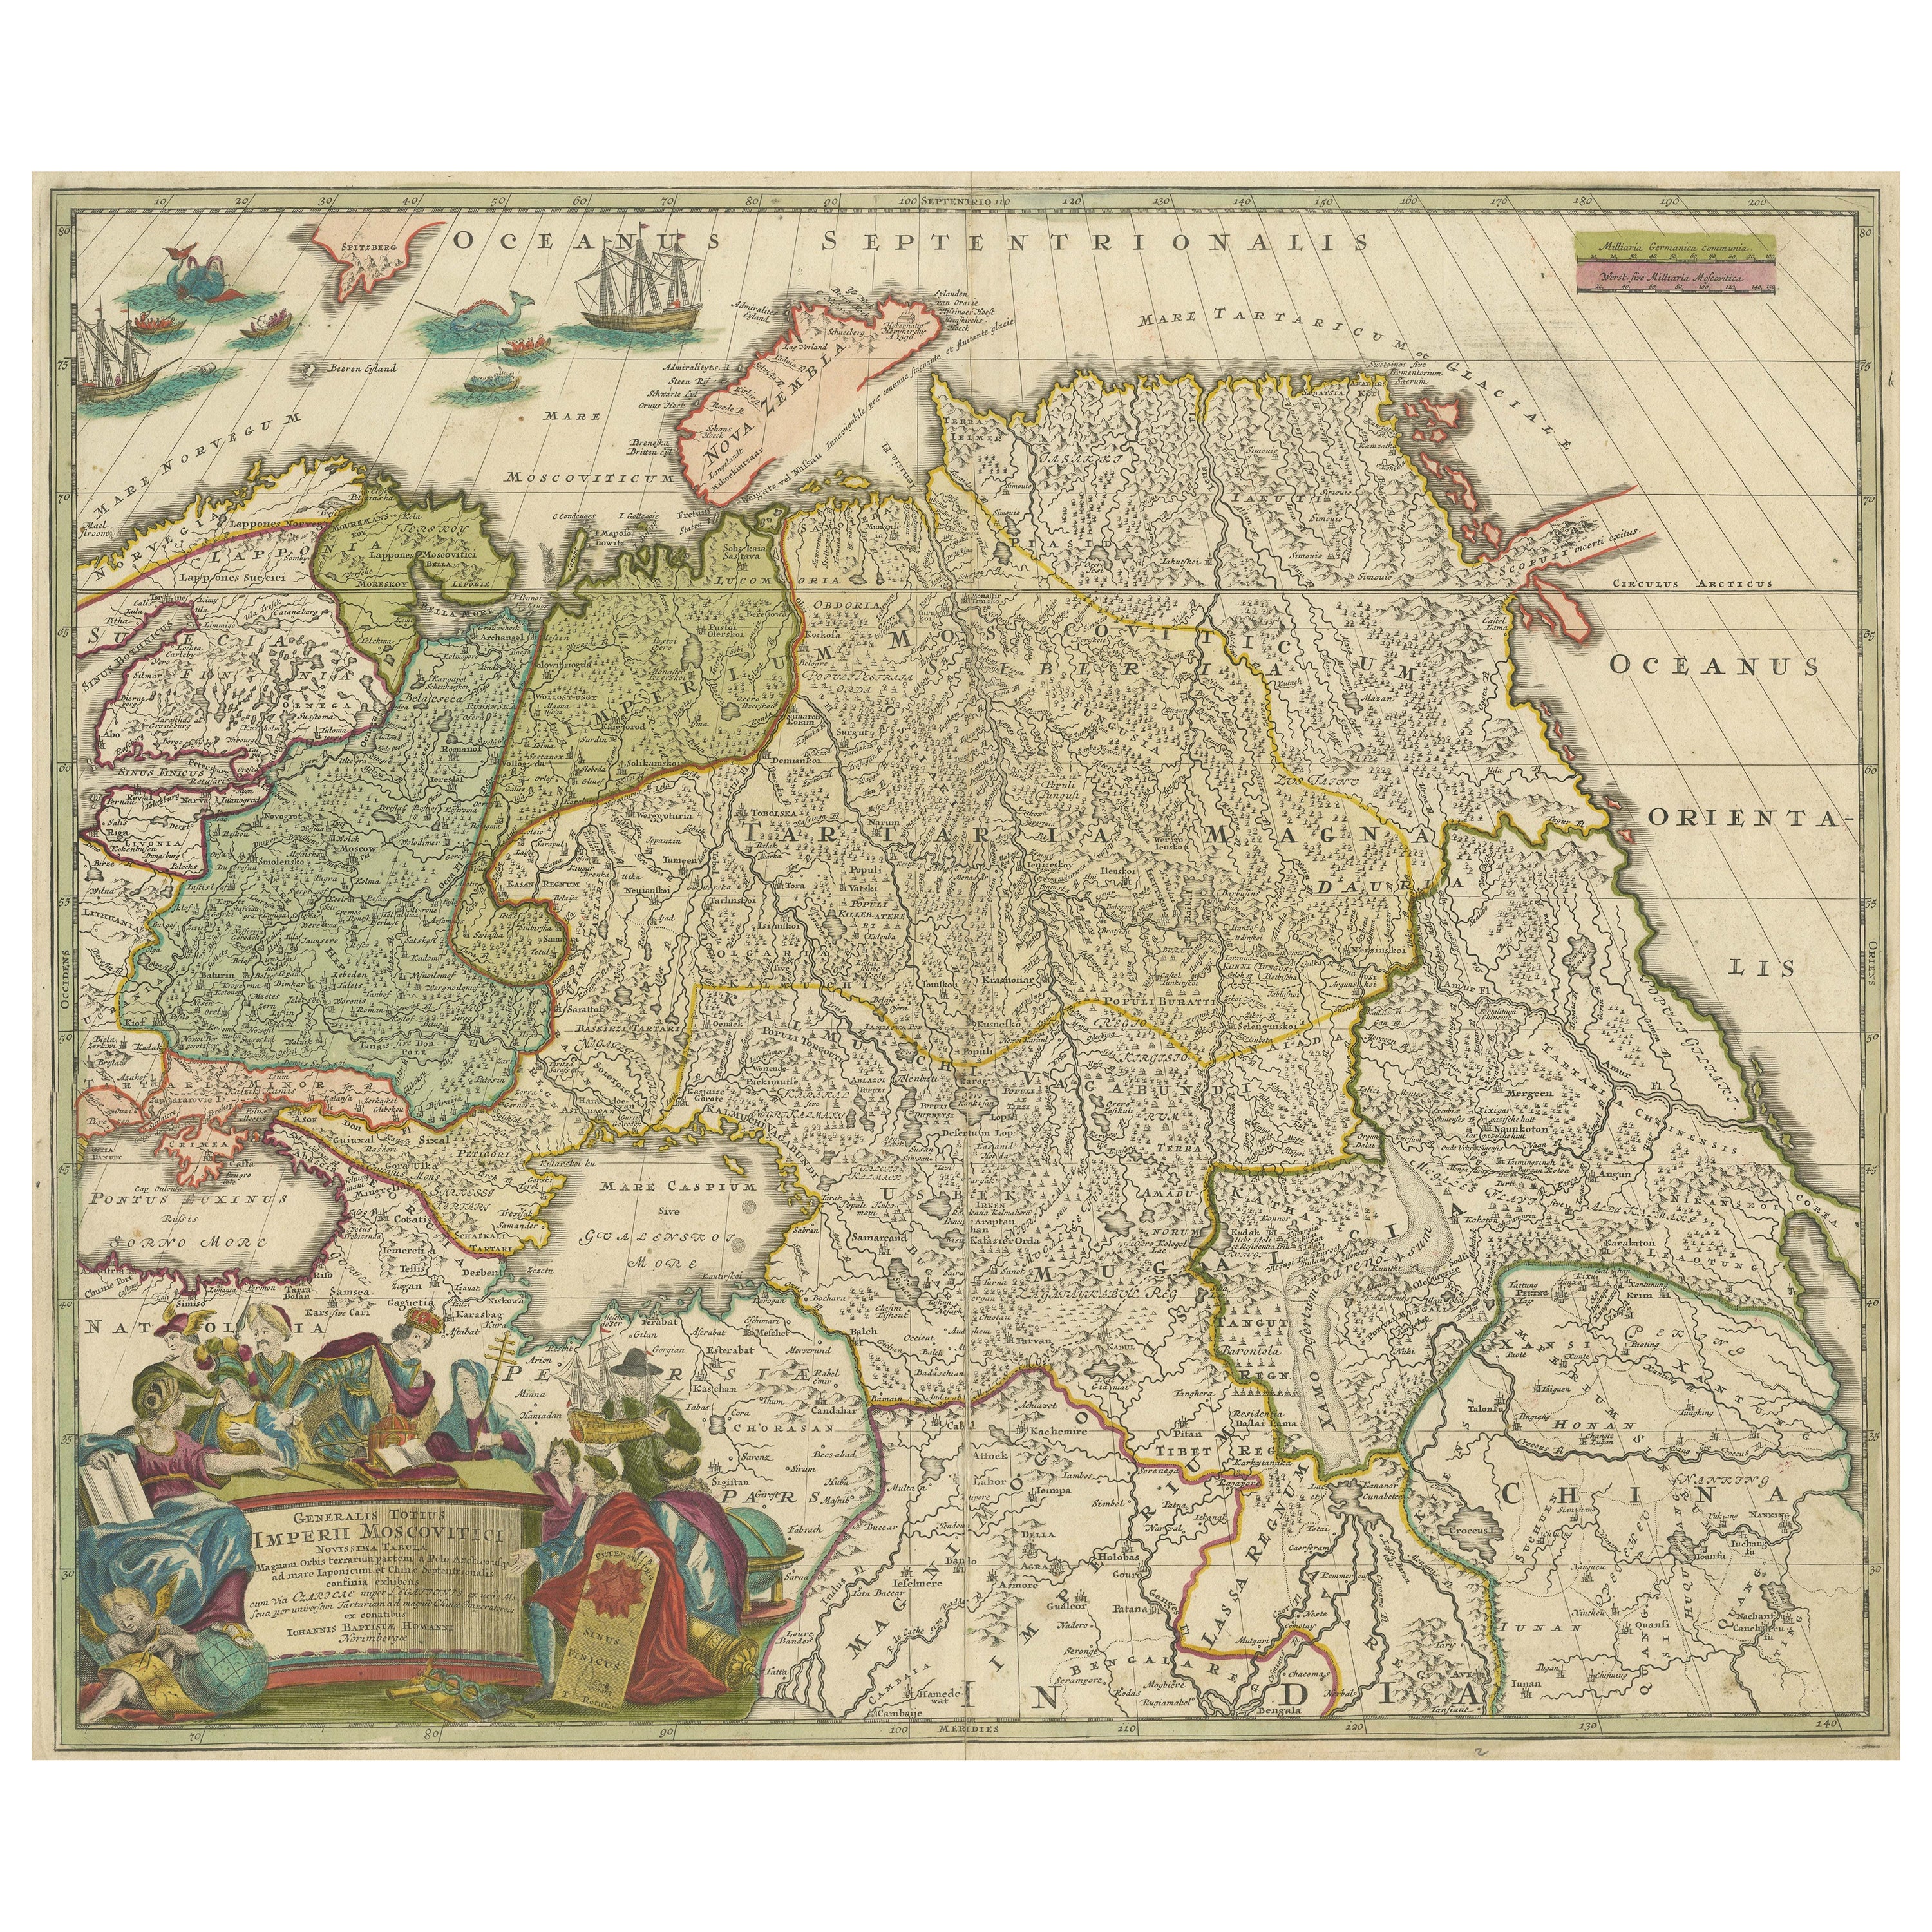 Antique Map of Russia and Central Asia, showing the Northeast Passage For Sale